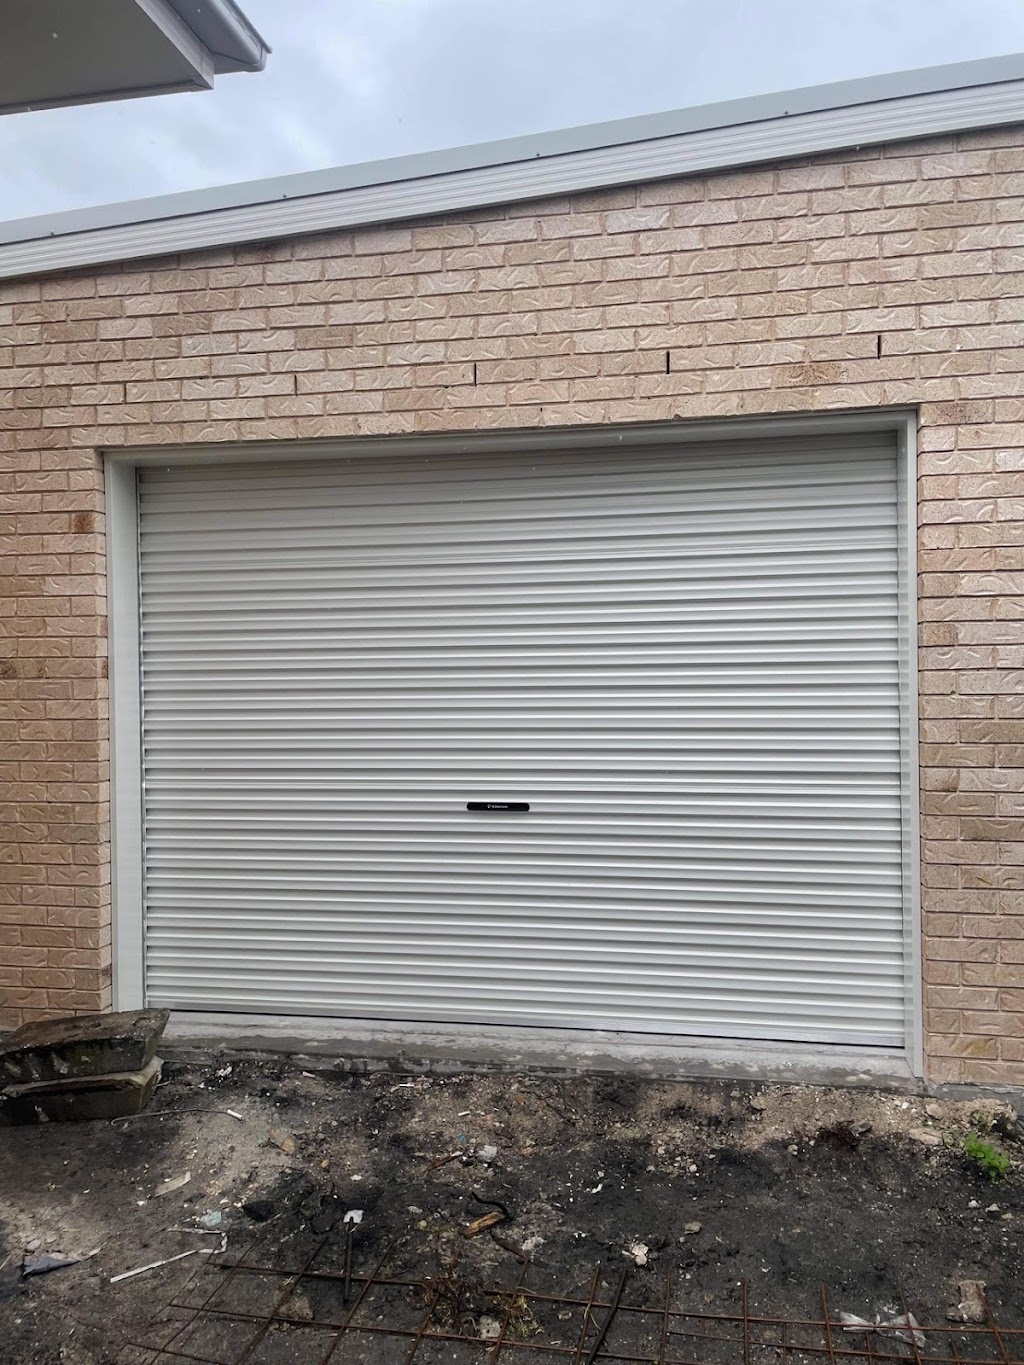 East Coast Doors & Motors | point of interest | 7/62 Spitfire Pl, Rutherford NSW 2320, Australia | 0481160077 OR +61 481 160 077